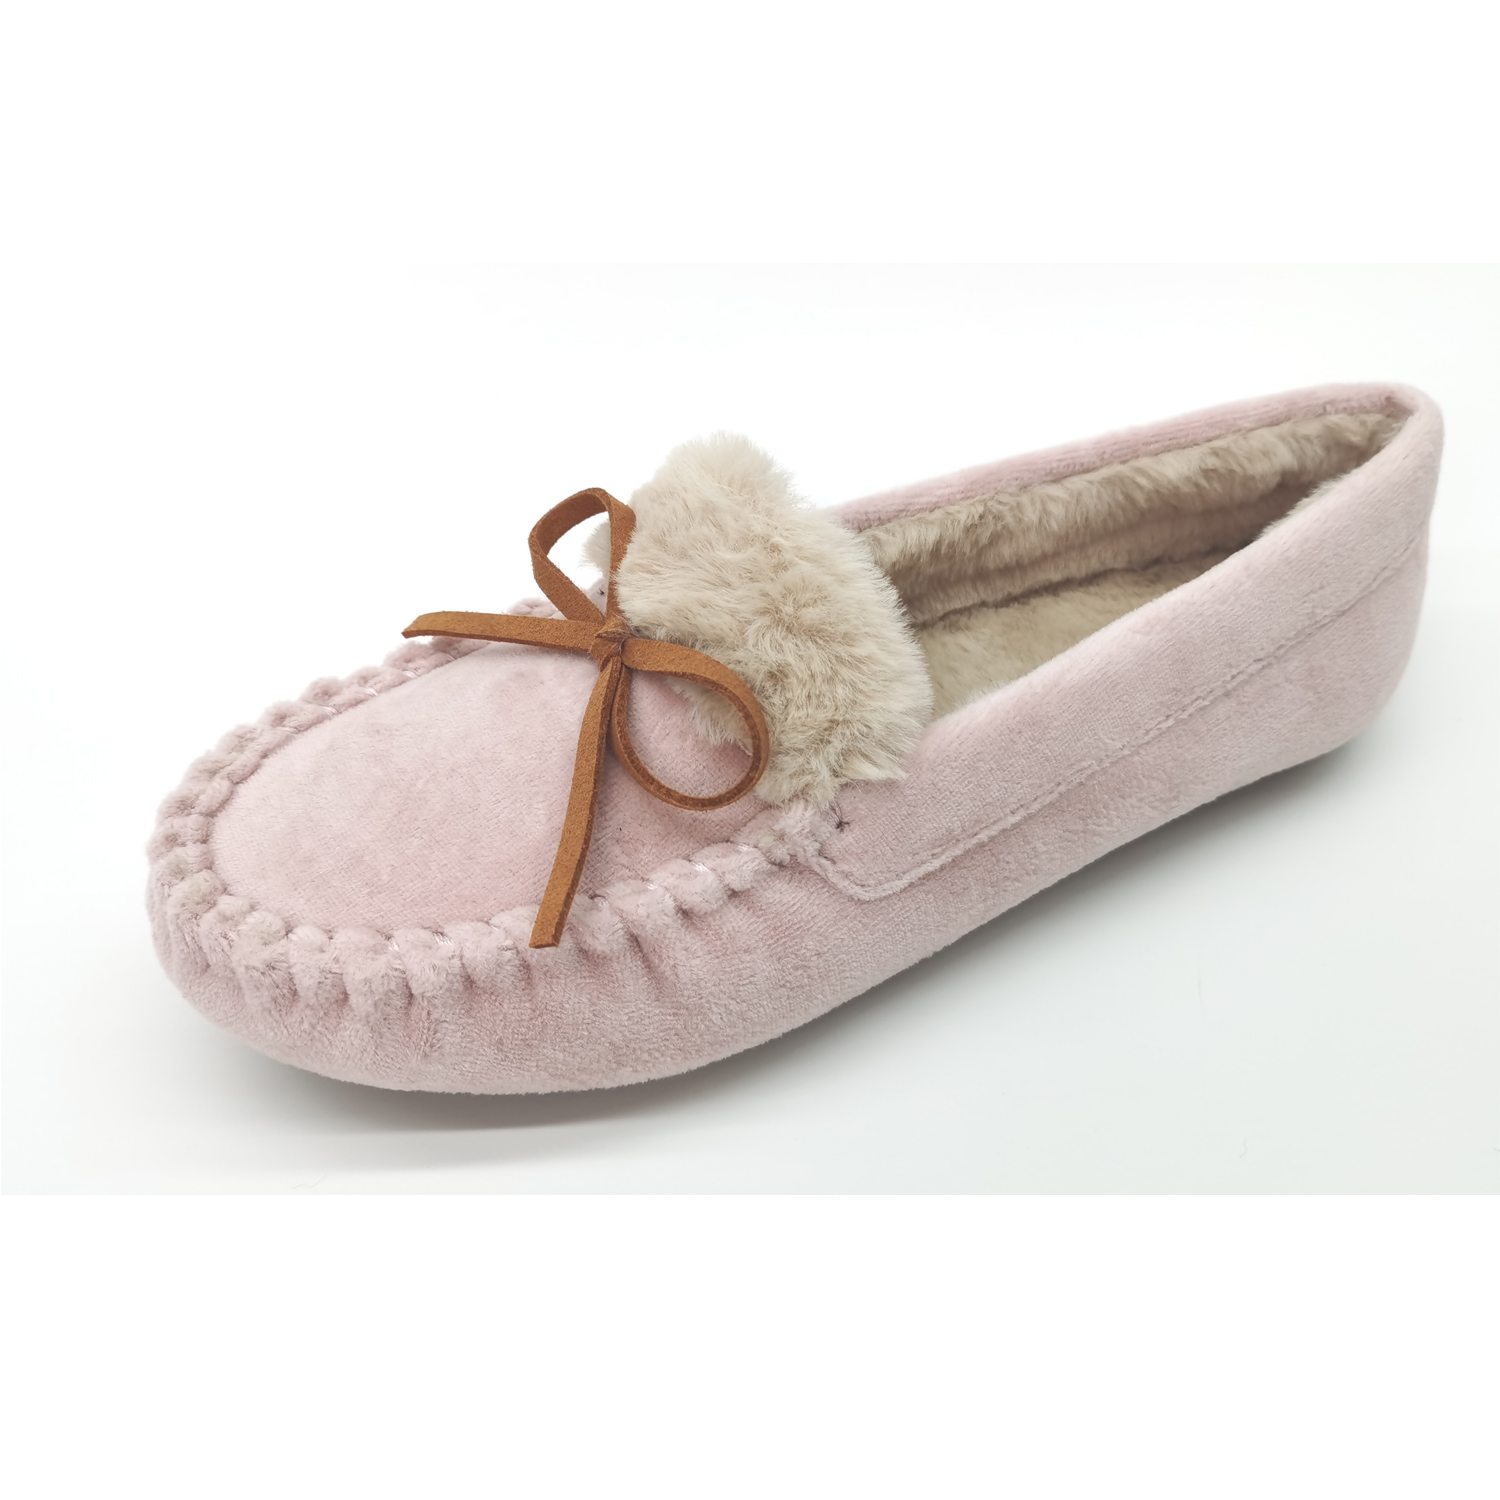 Women's Moccasin Slippers  Lace-Up Bow Cozy Indoor & Outdoor Moccasins Slip On Loafers Shoes for Women 